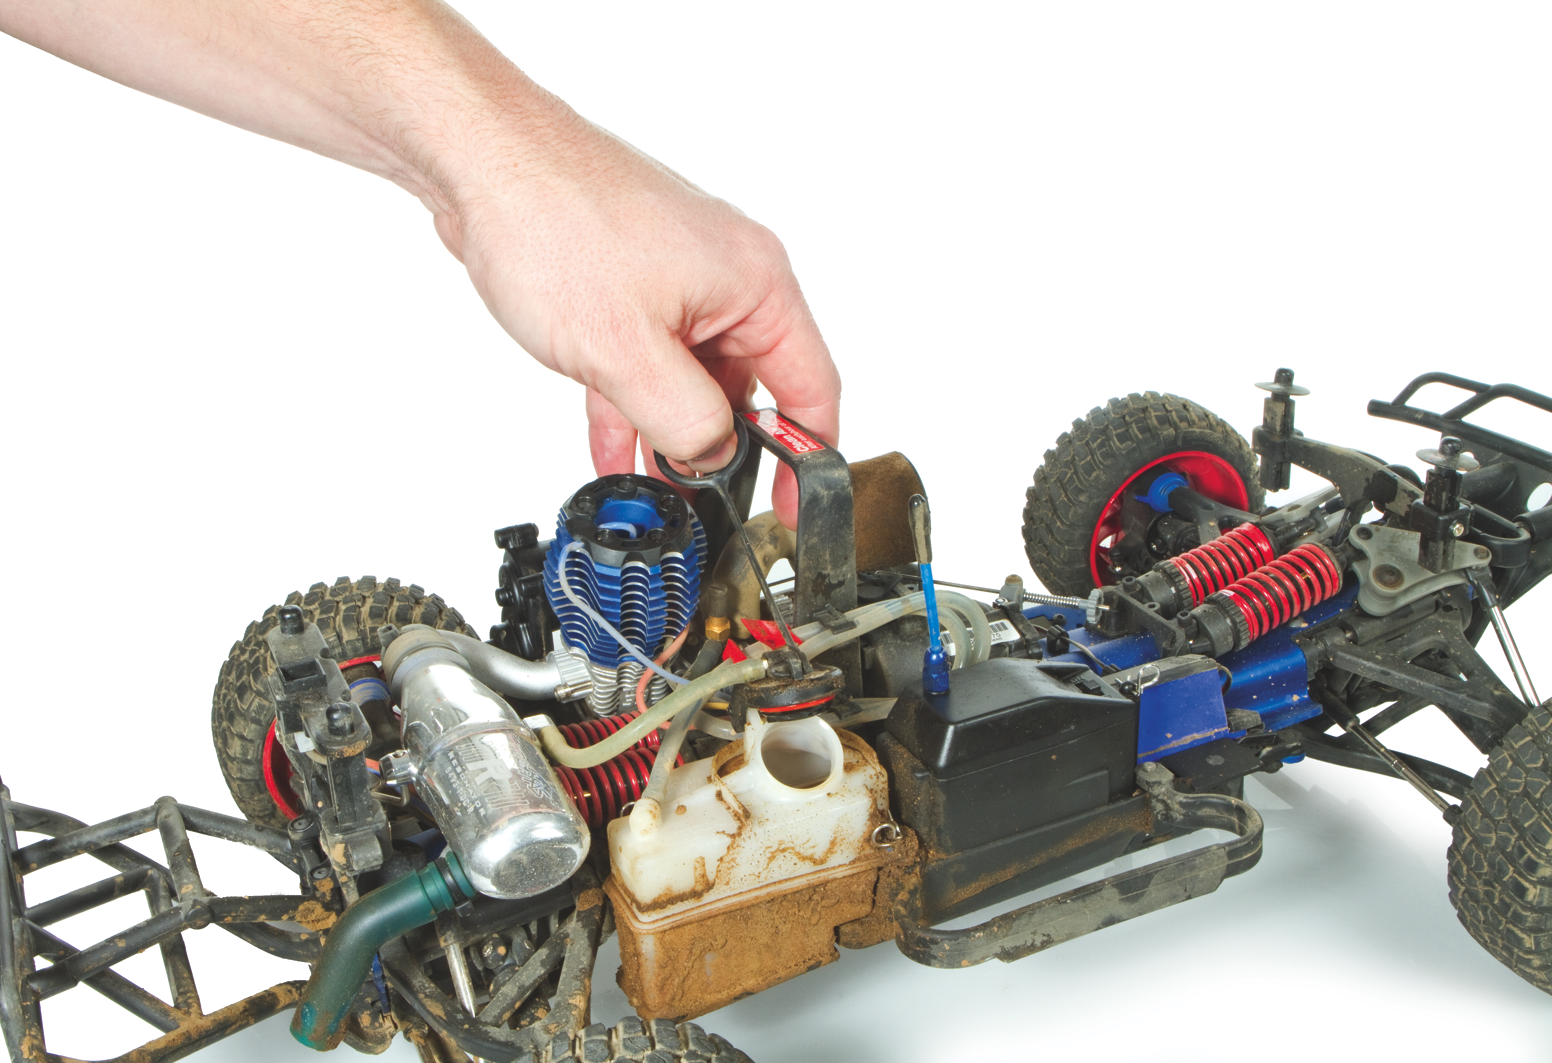 real engine rc cars